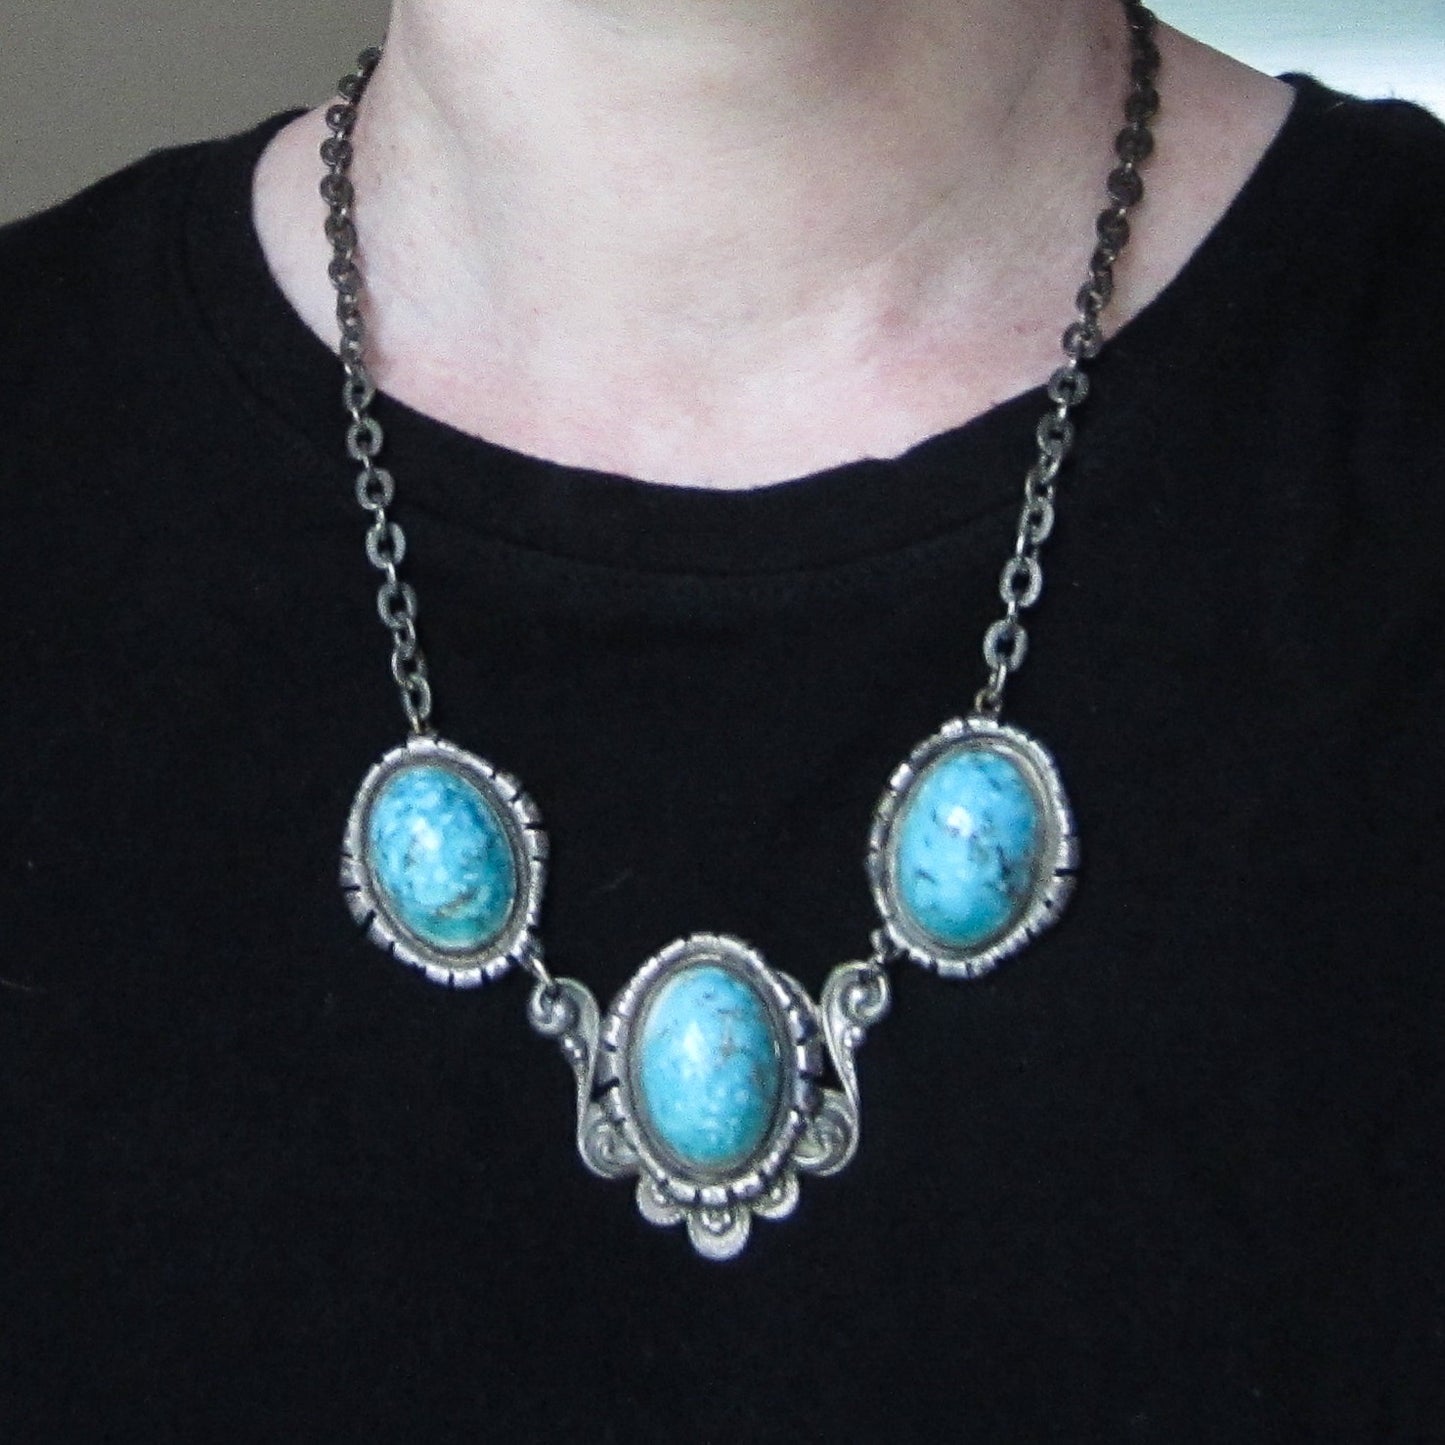 Art Deco Turquoise Art Glass Necklace Silver Plate c. 1930